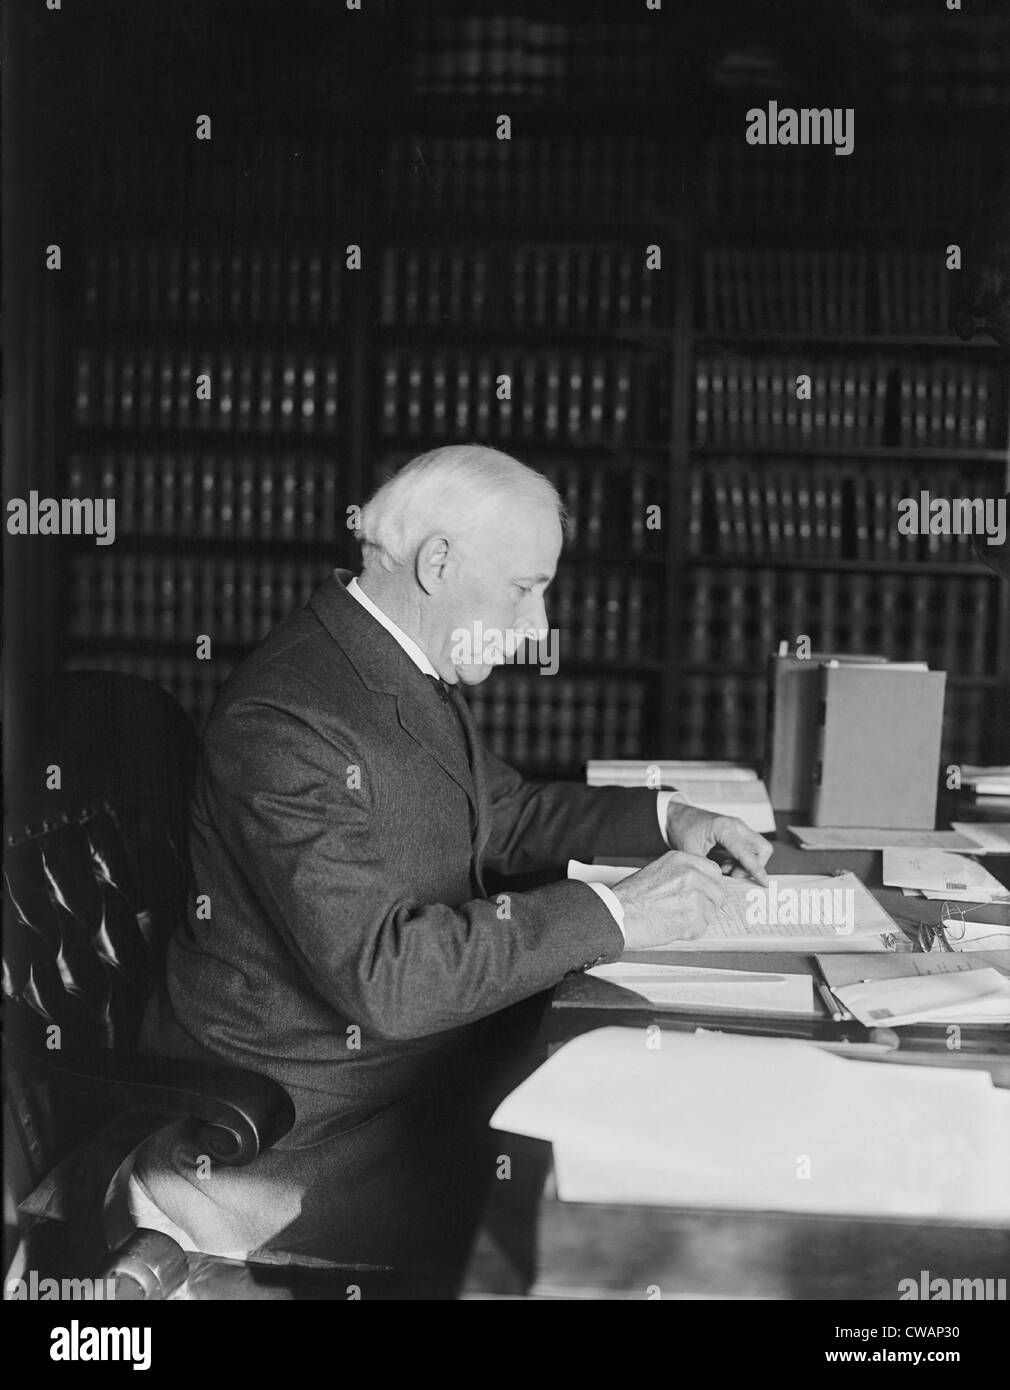 Willis Van Devanter (1859-1941), Associate Justice of the United States Supreme Court from 1911 to 1937. 1924 portrait in his Stock Photo